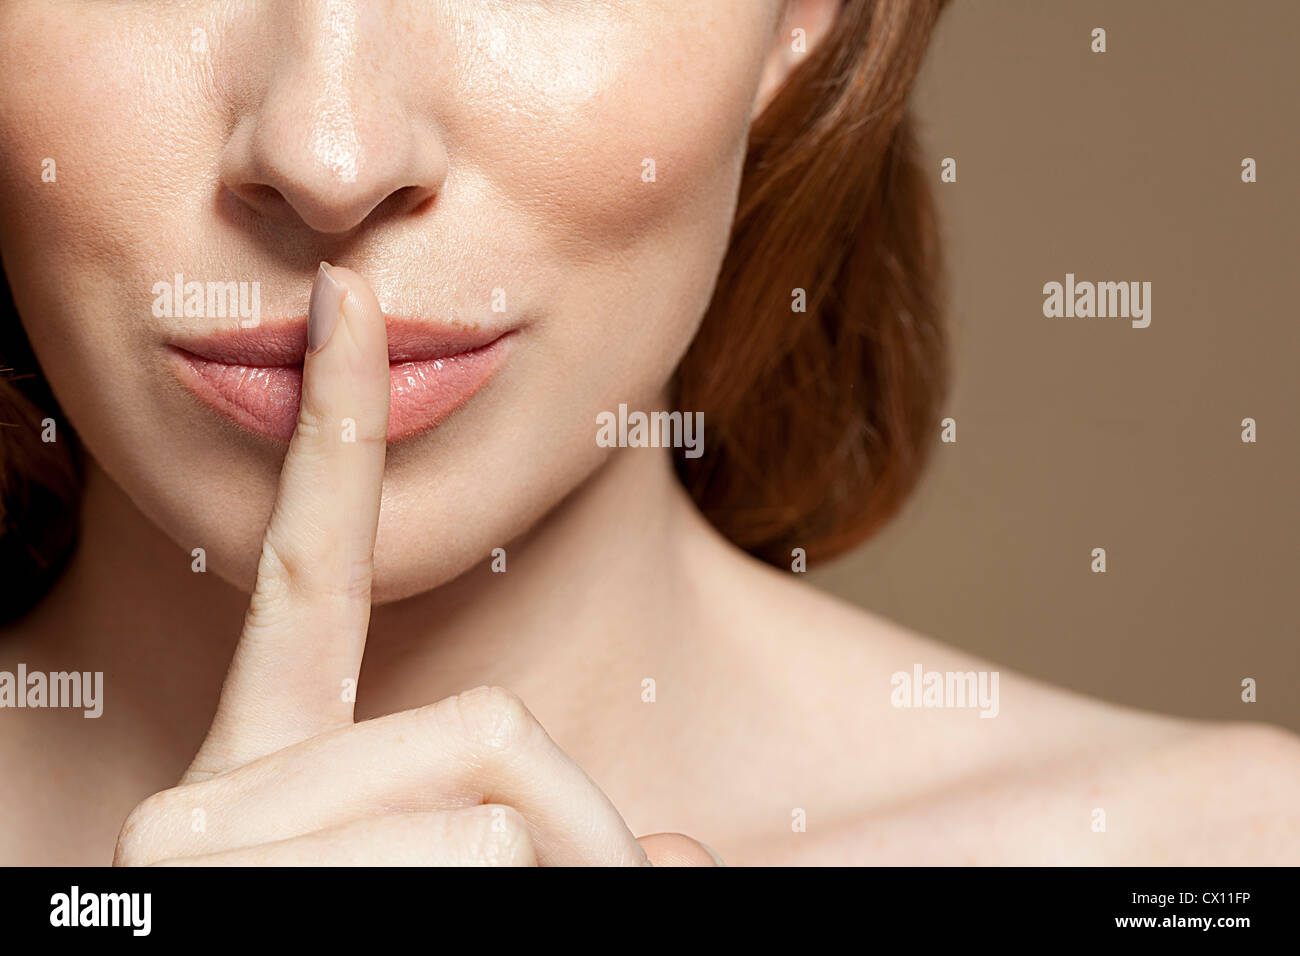 Woman with finger on lips, close up Stock Photo